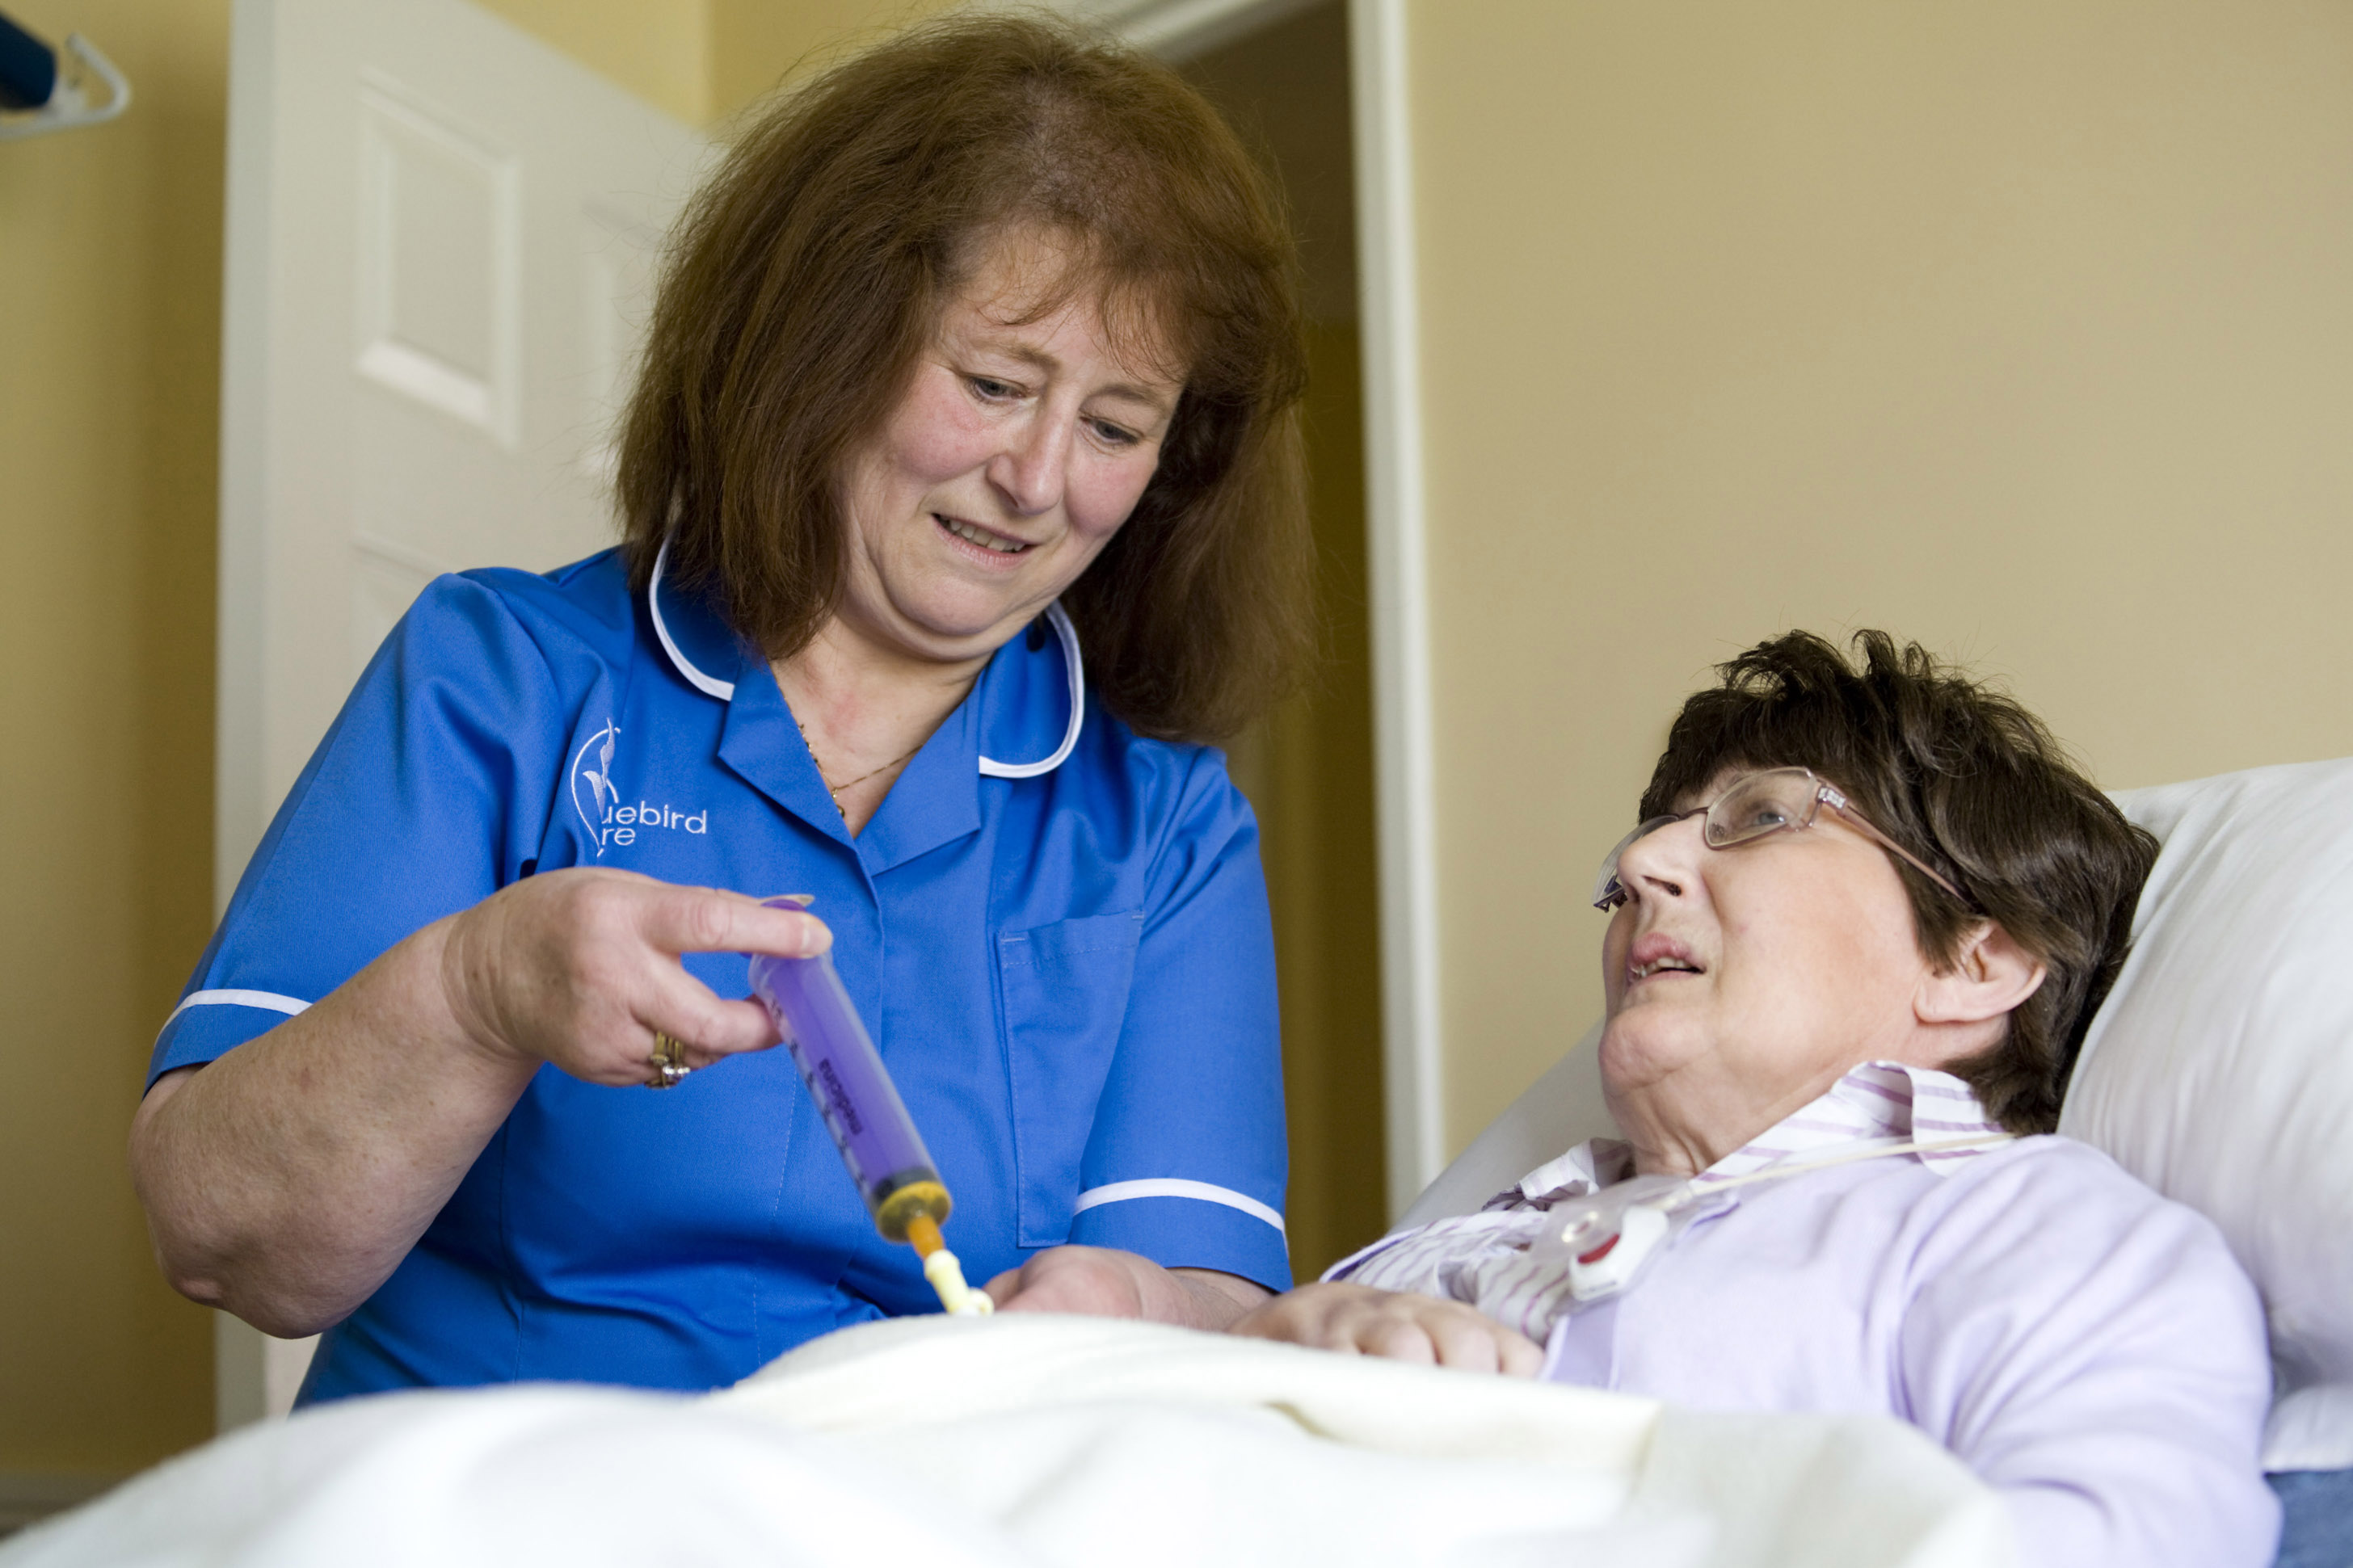 Home care in York, complex care in bed